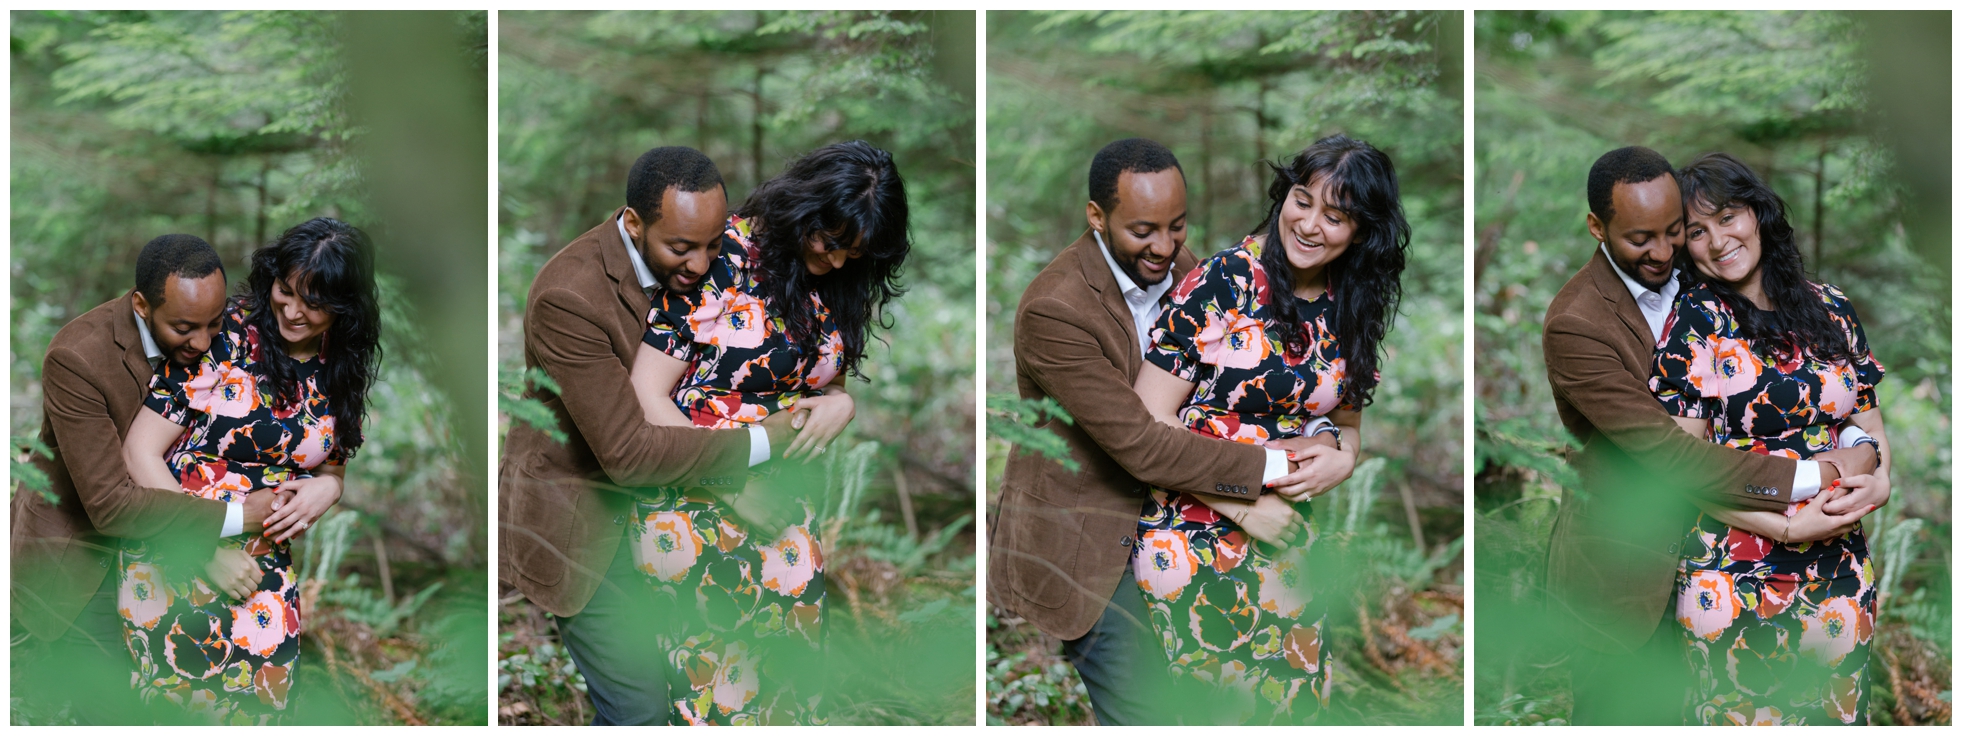 Tara and Petros Engagement Session (Life by Selena Photography)_0056.jpg